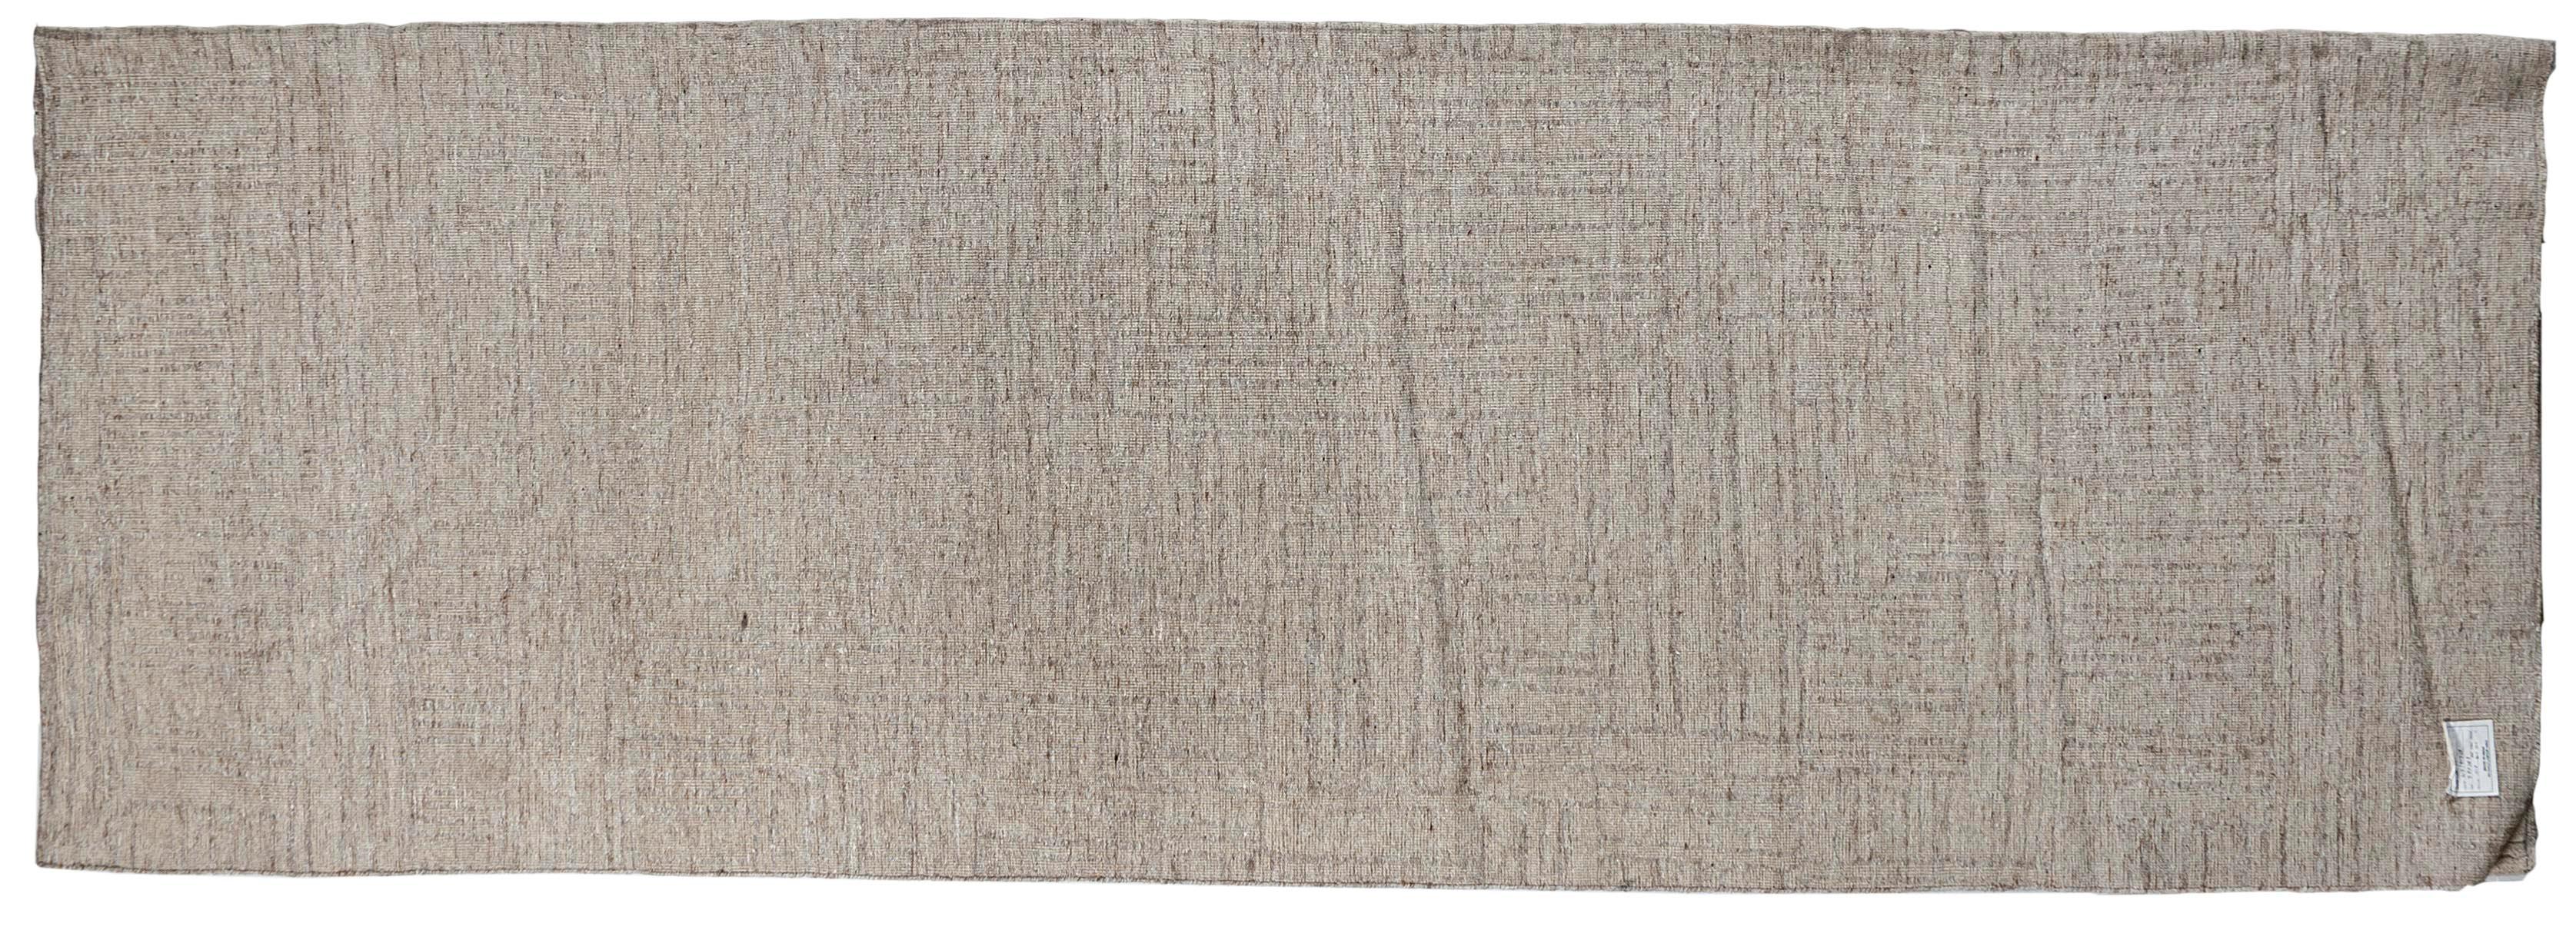 The creative use of cut and looped wool fibers gives this eye-catching area rug a distinct look and enticing feel. handmade in India using all natural materials and dyes.